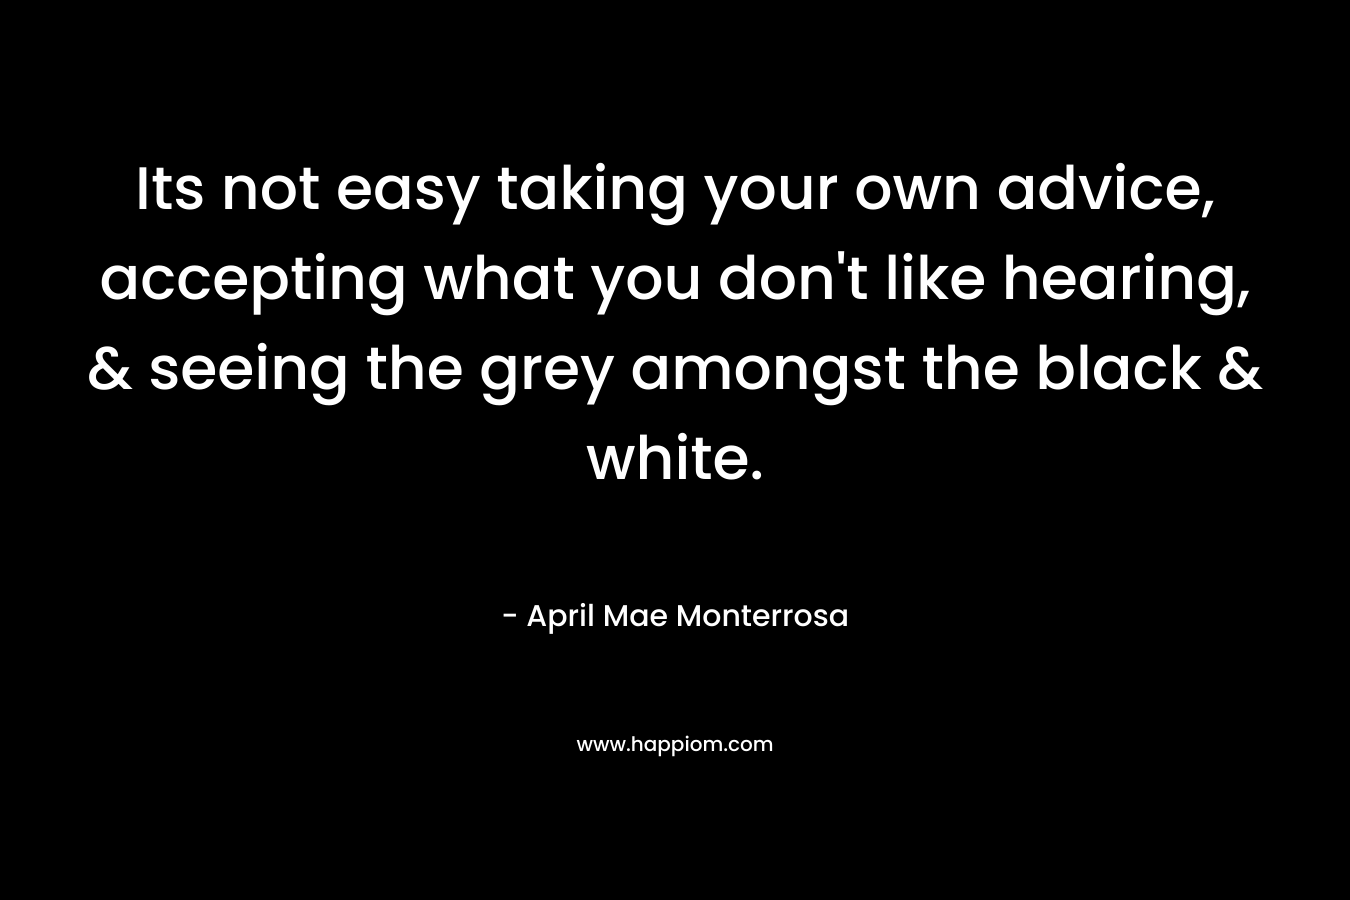 Its not easy taking your own advice, accepting what you don't like hearing, & seeing the grey amongst the black & white.